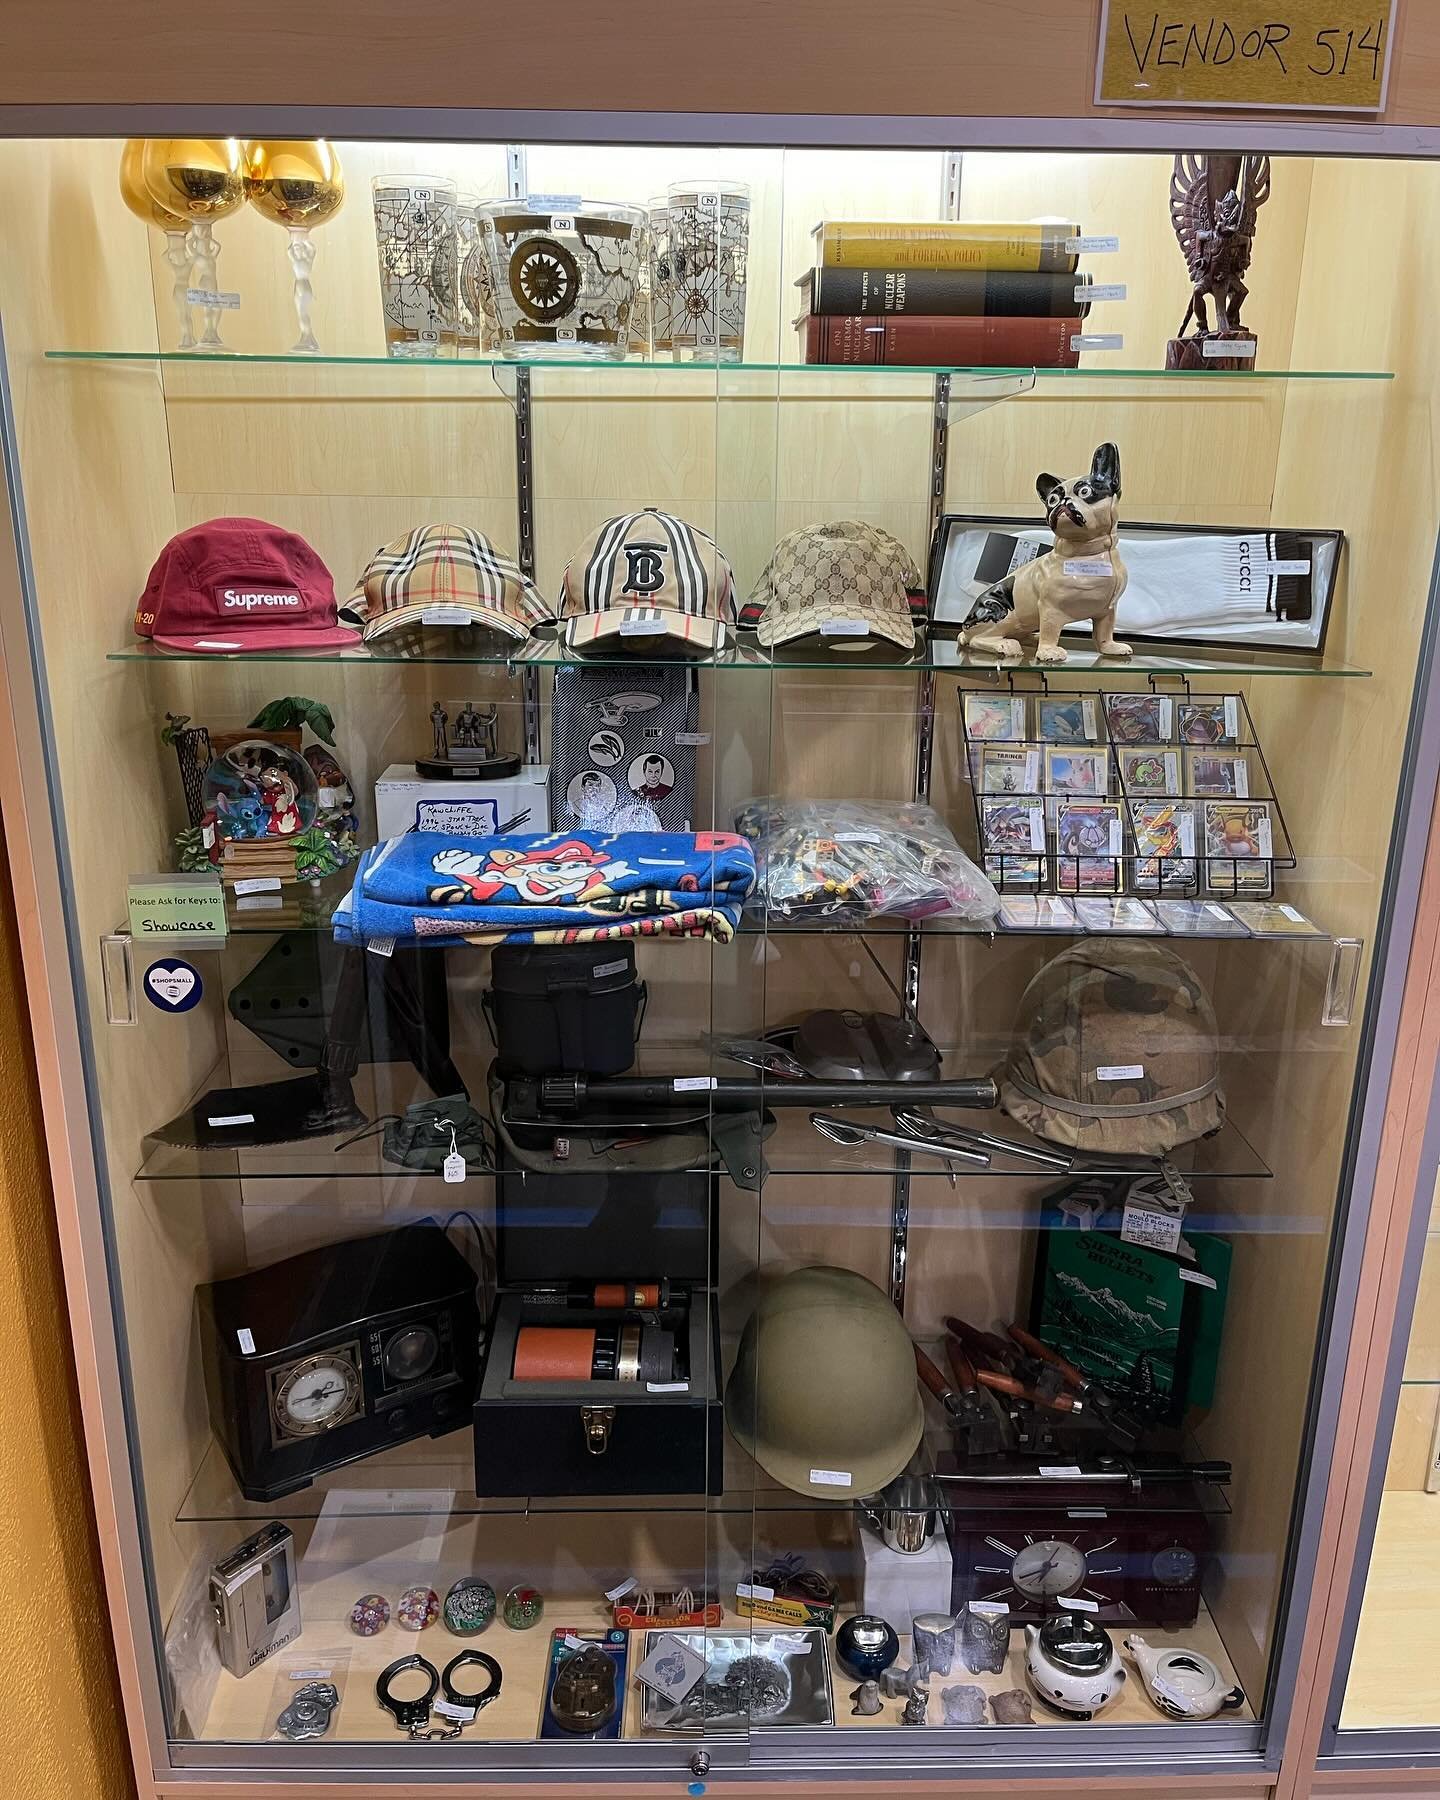 🚨 NEW VENDOR ALERT 🚨 

Good morning, friends! We are so happy to welcome @mitchmacsknickknacks (Vendor 514) to The Rusty Crown today.
This wonderfully eclectic showcase features everything from military memorabilia to Pokemon and designer caps to, 